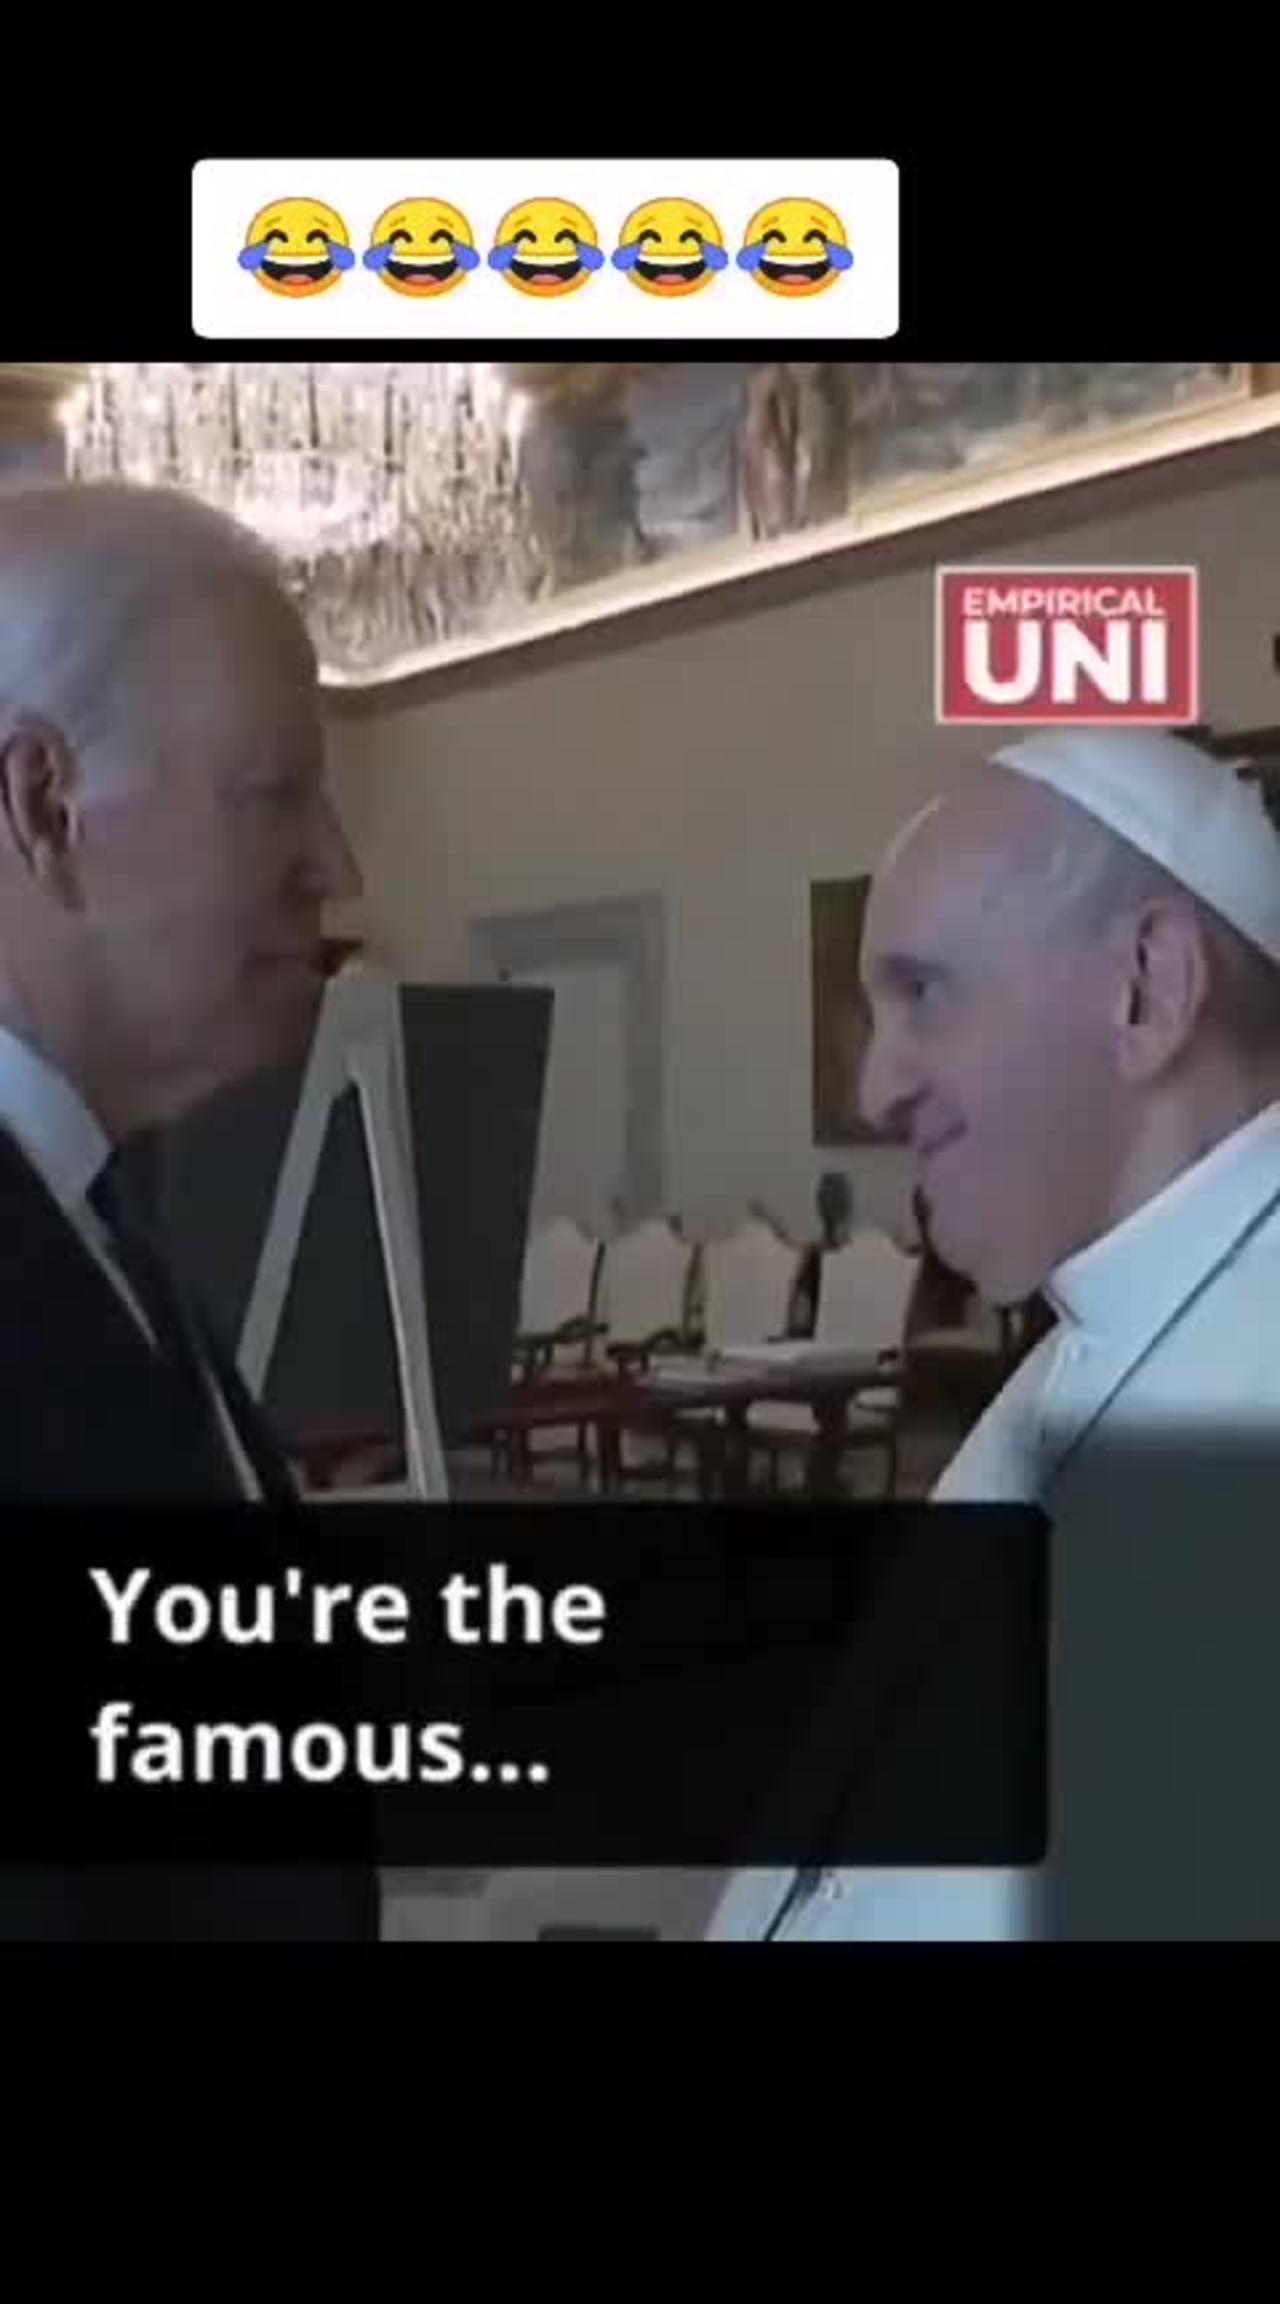 Pope knows he is a famous baseball player